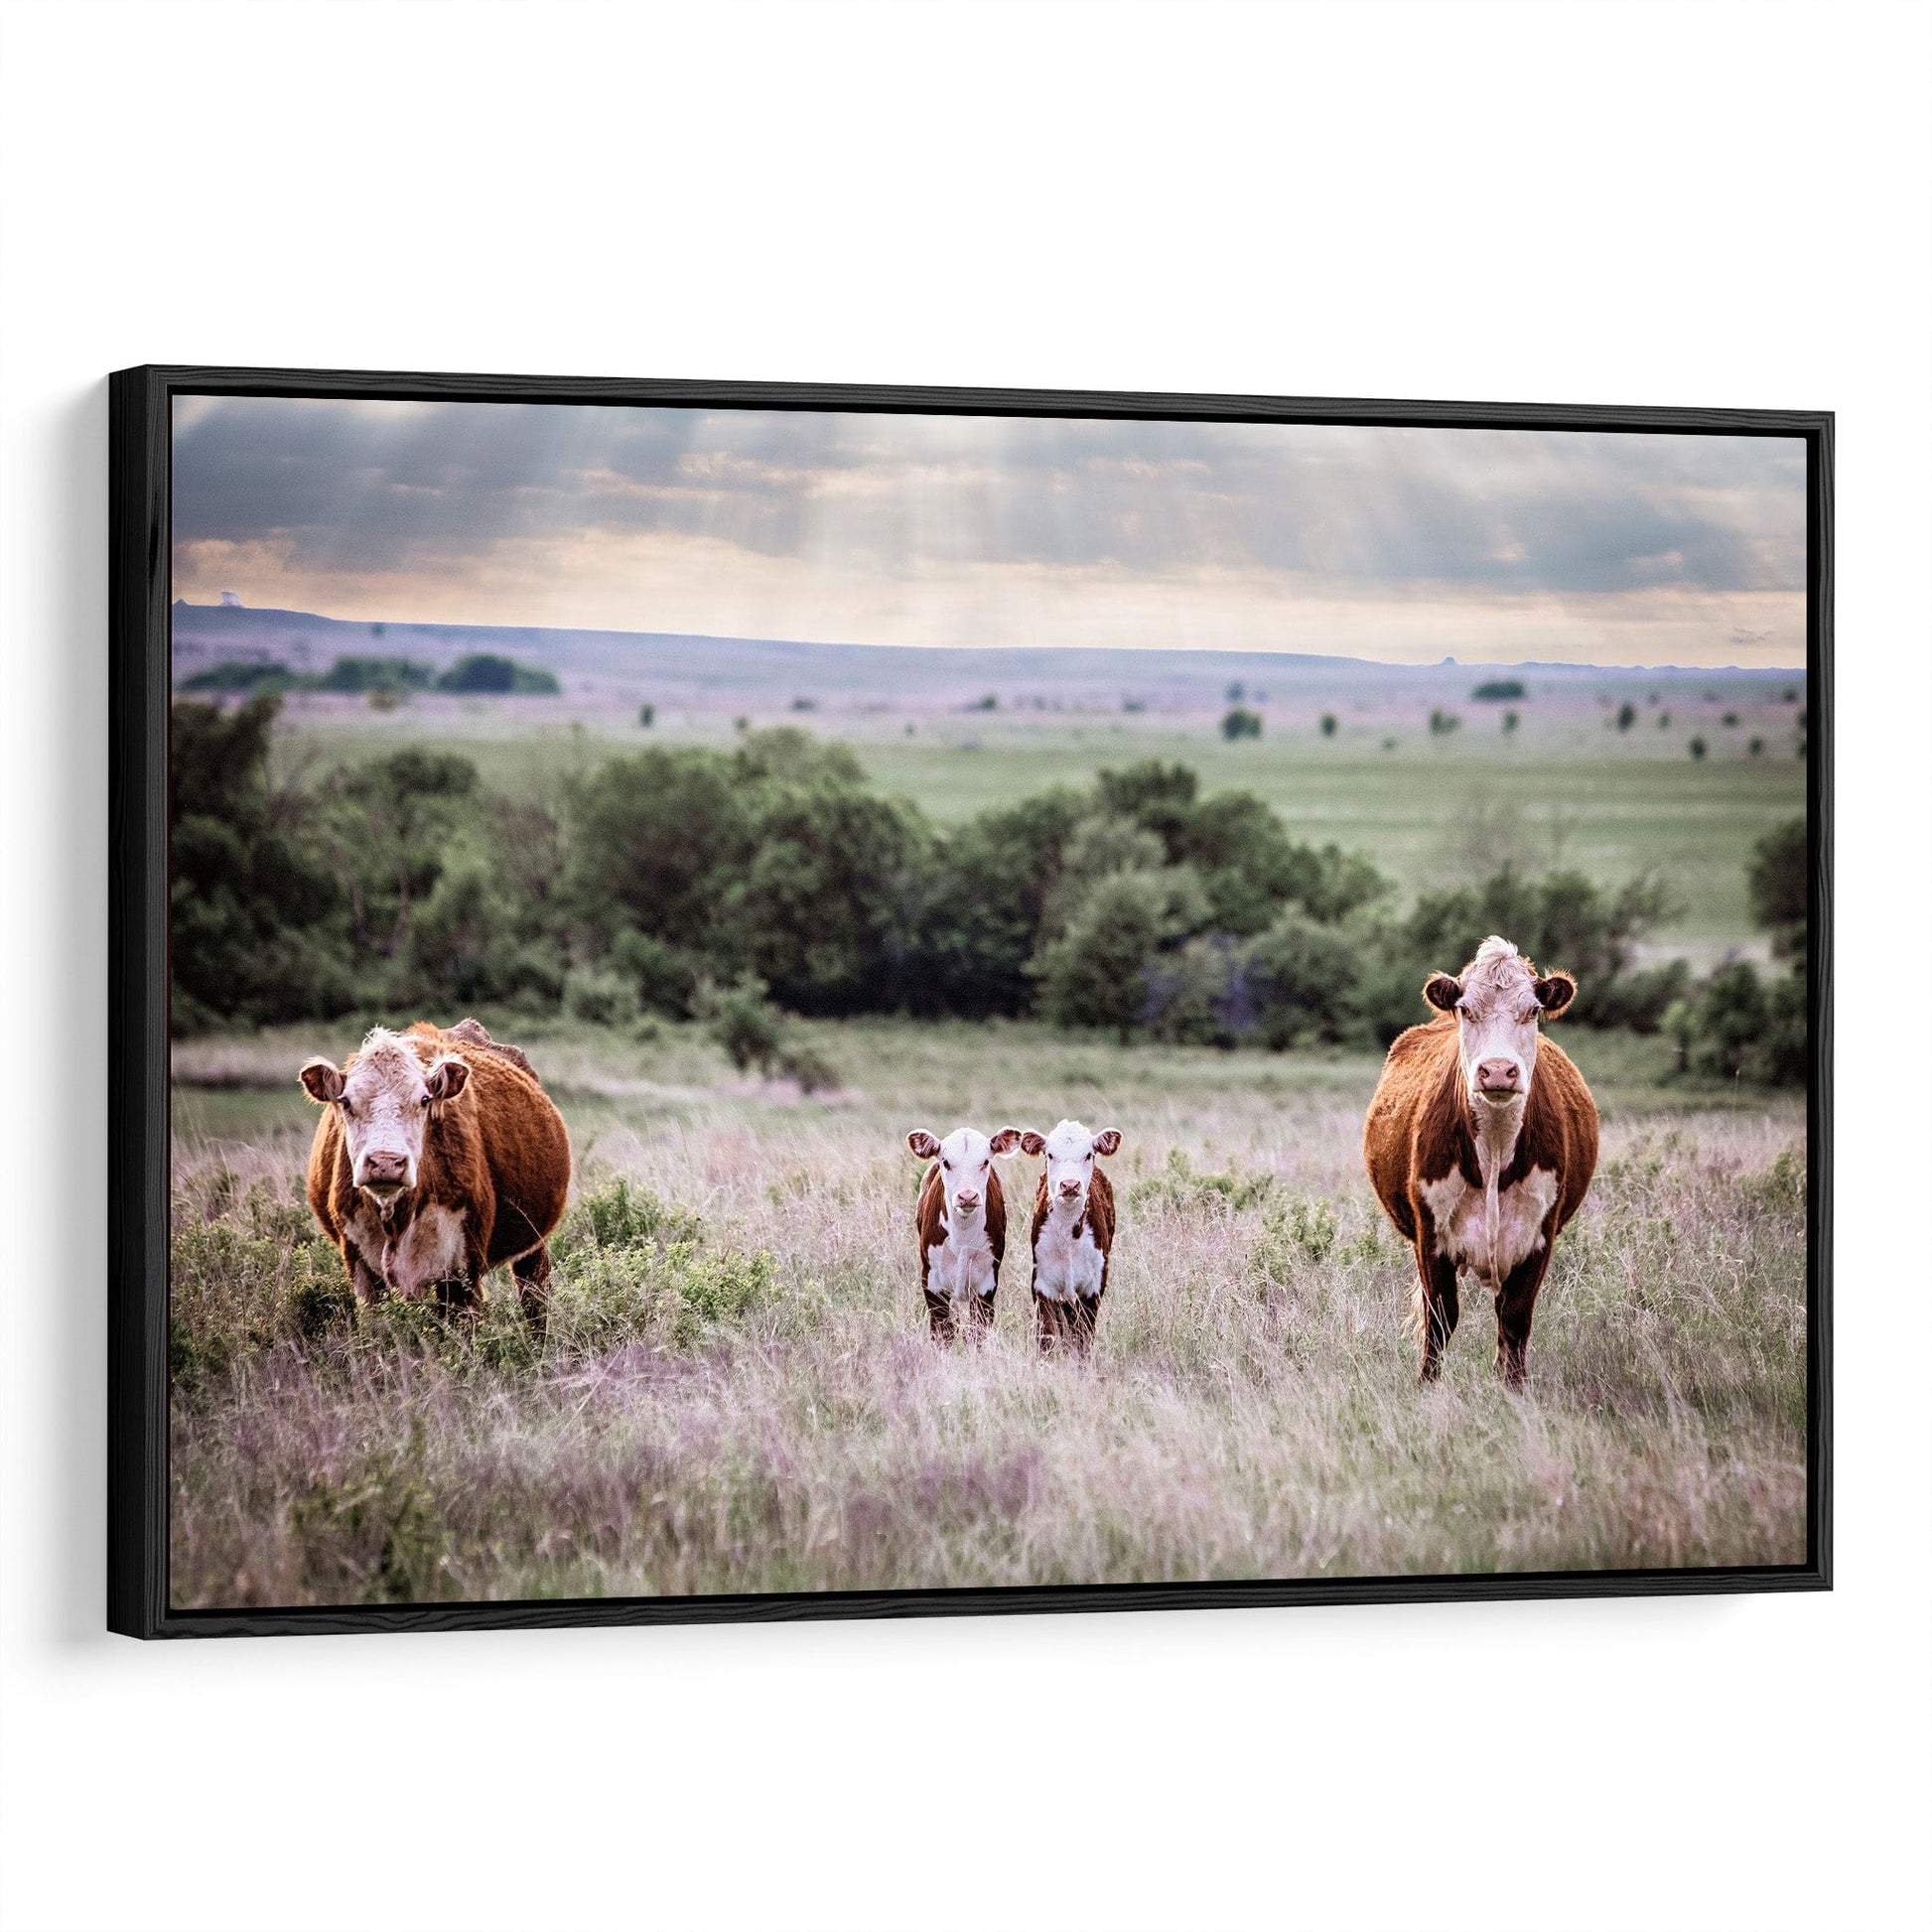 Cow Nursery Decor for Twins Canvas-Black Frame / 12 x 18 Inches Wall Art Teri James Photography